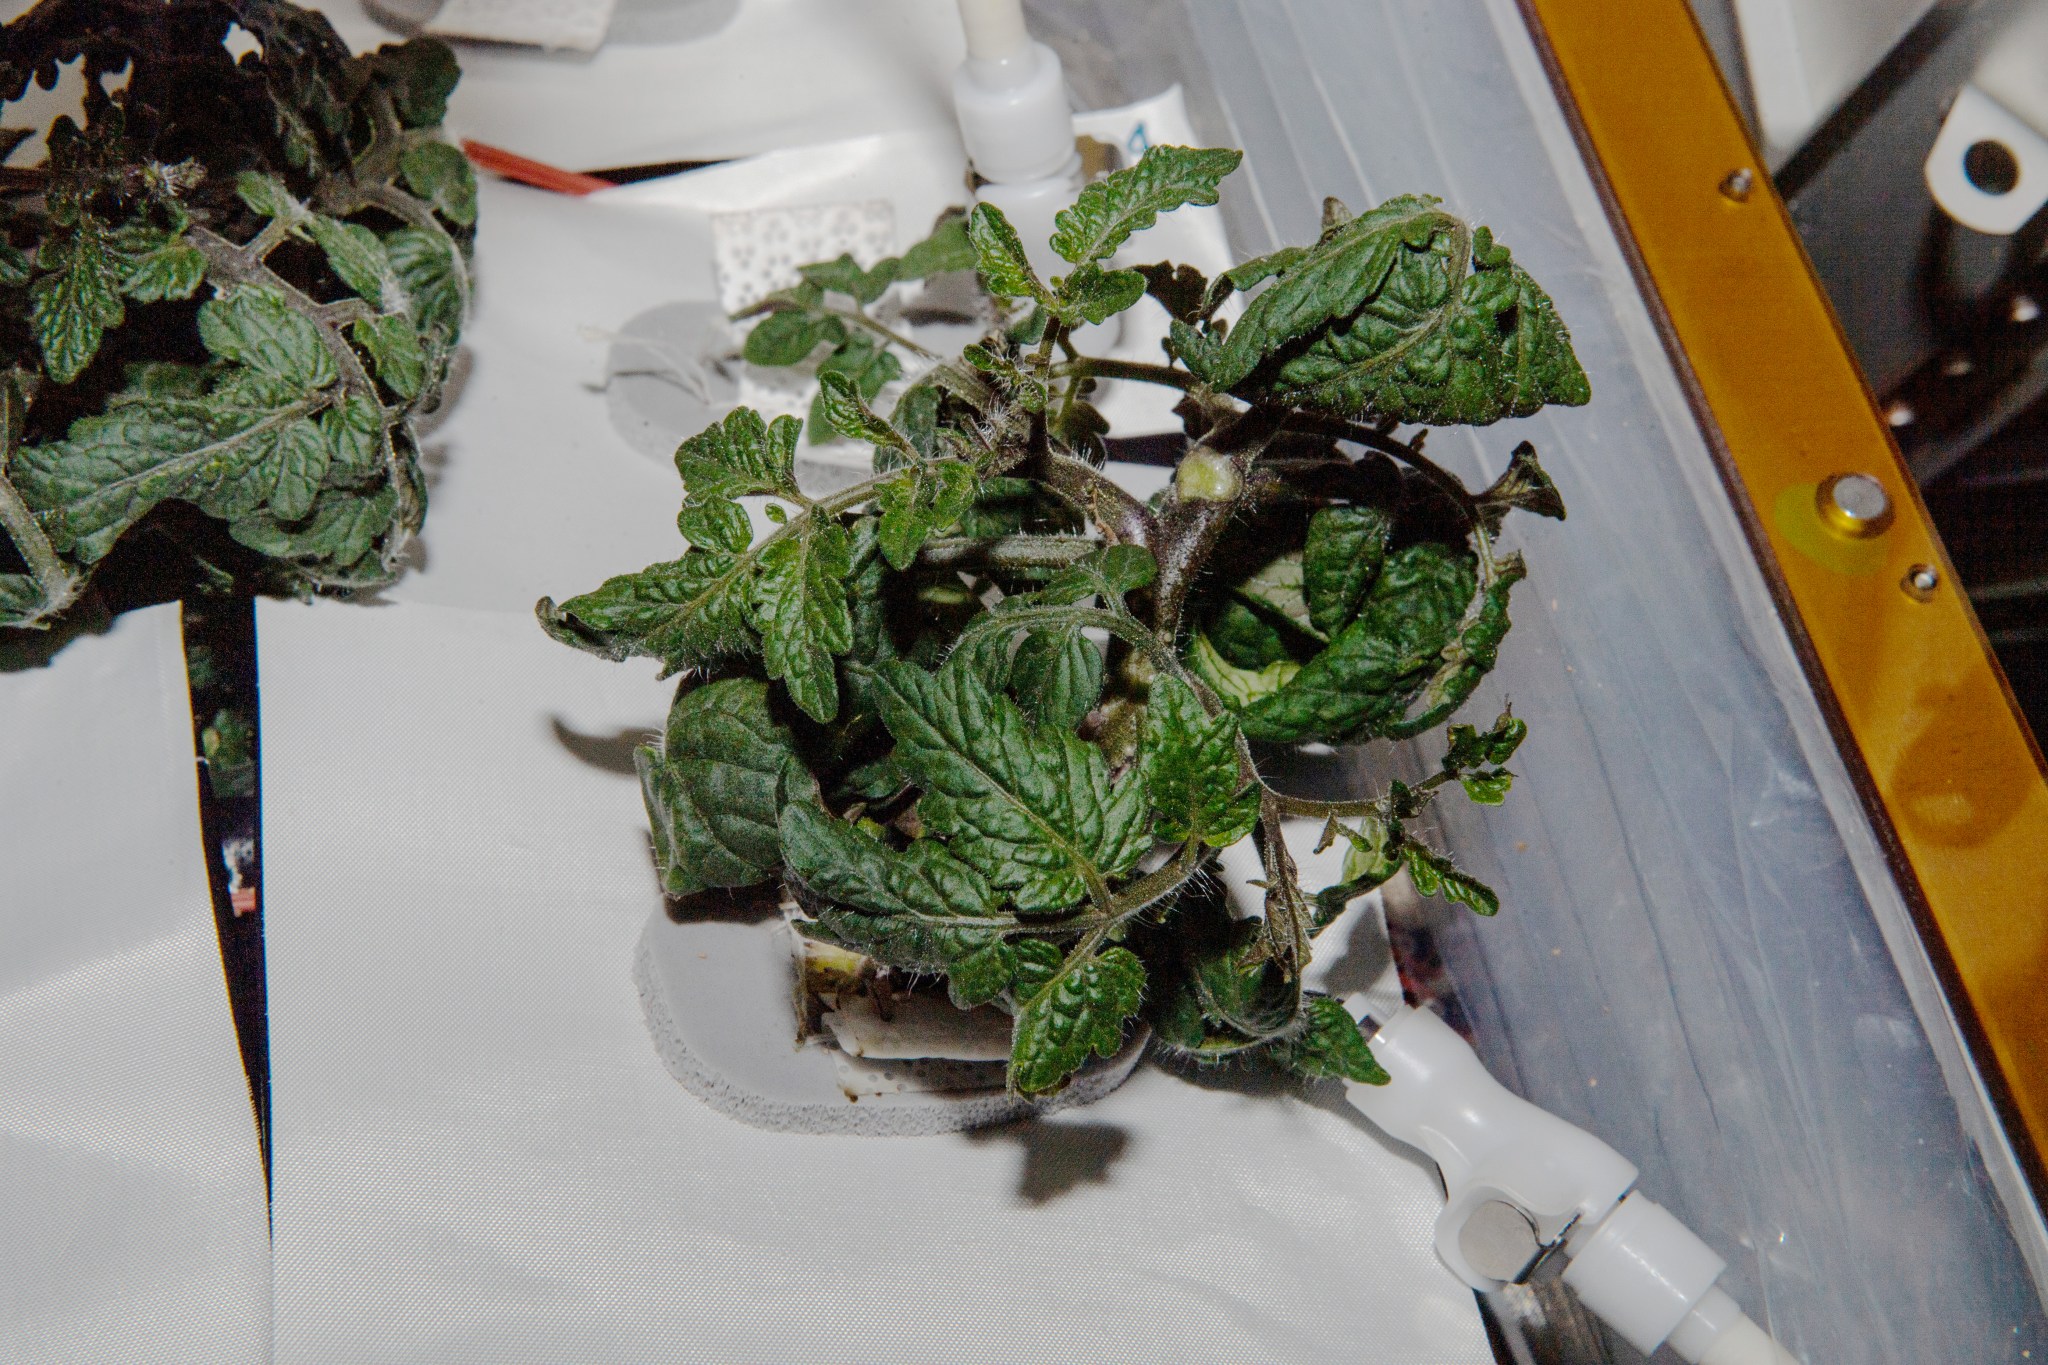 image of tomato plants growing in the plant habitat on the space station